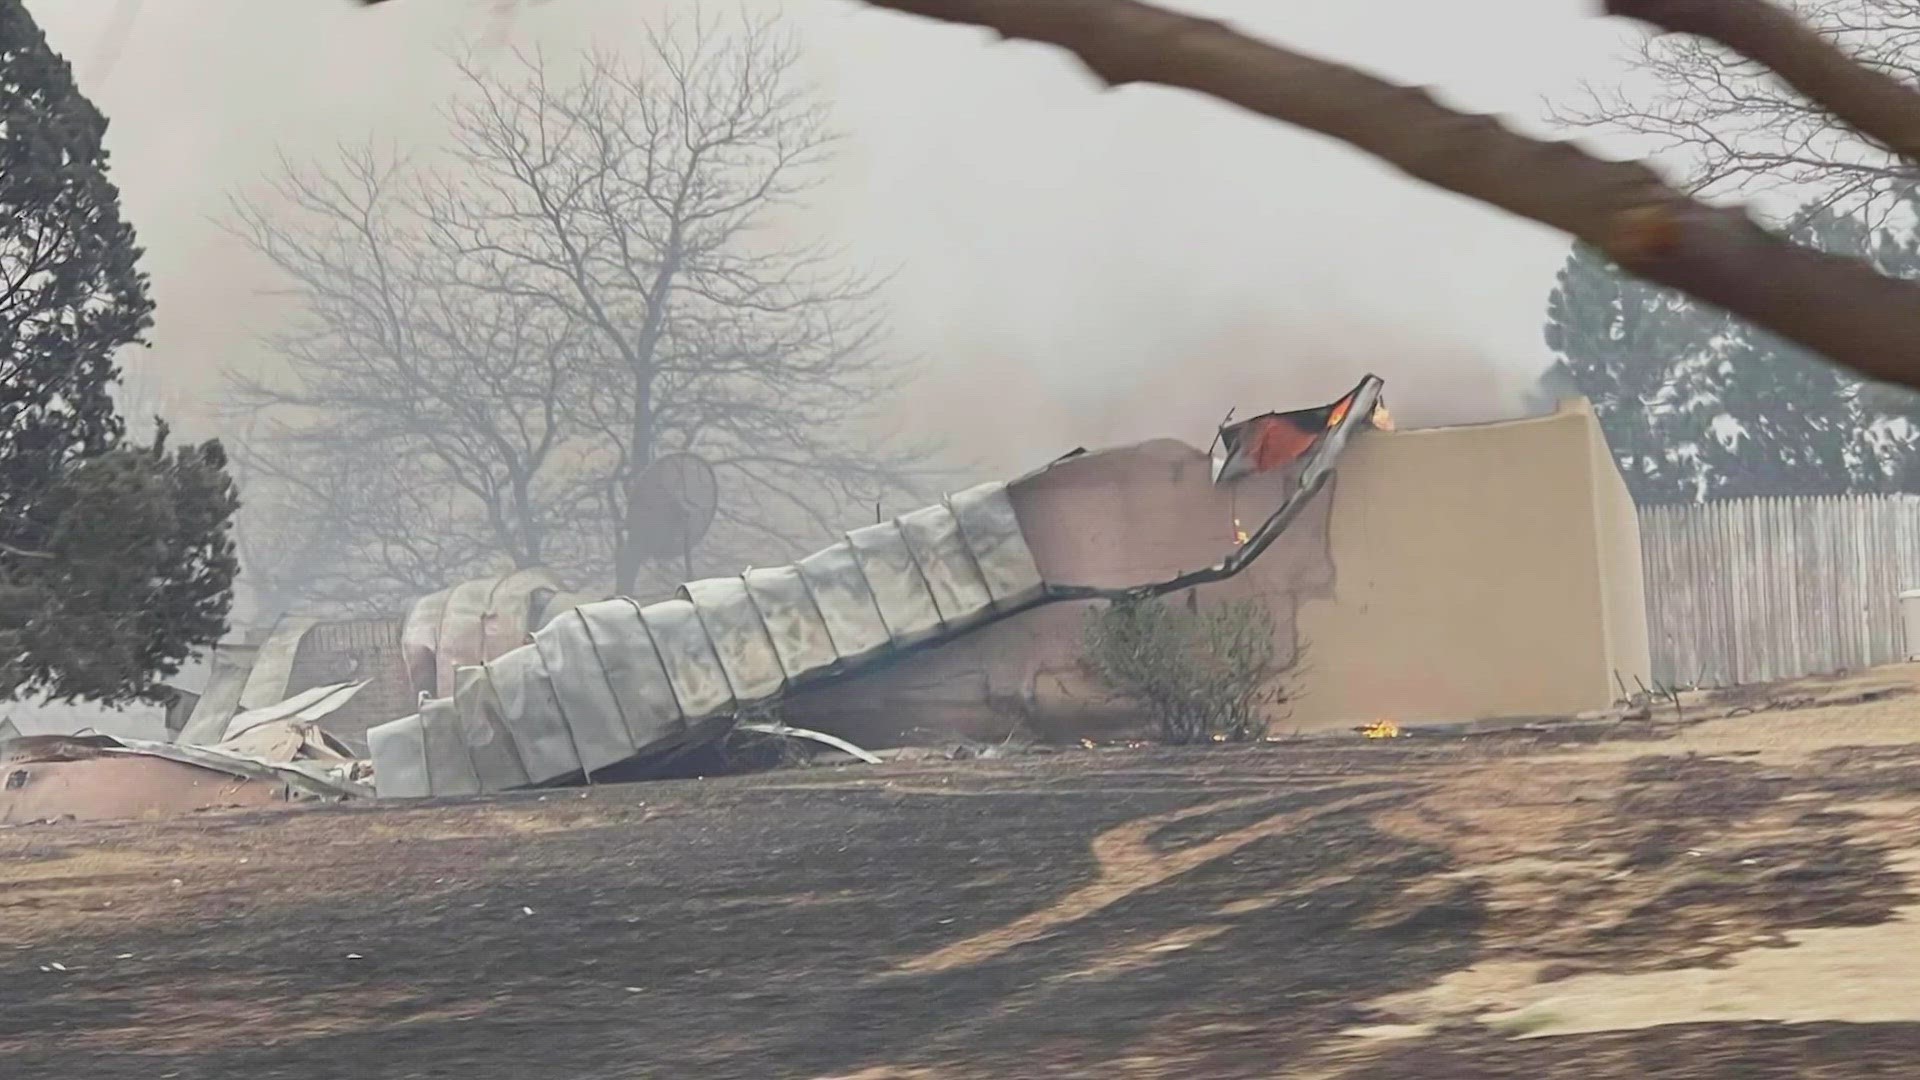 Two people have been confirmed to have died in the wildfires so far.